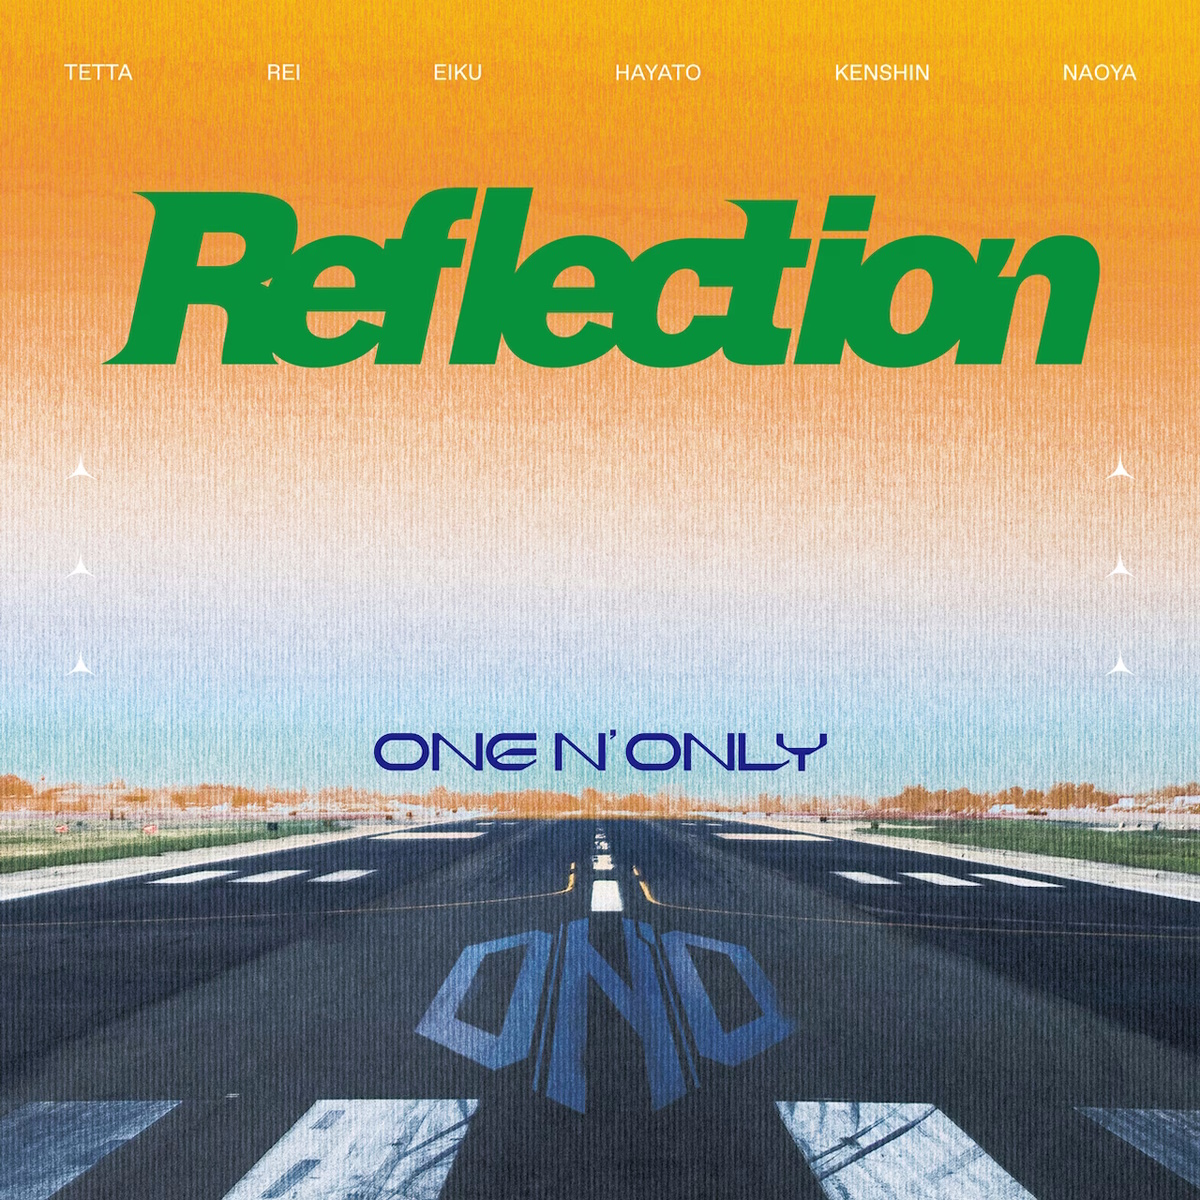 『ONE N' ONLY - Reflection』収録の『Reflection』ジャケット